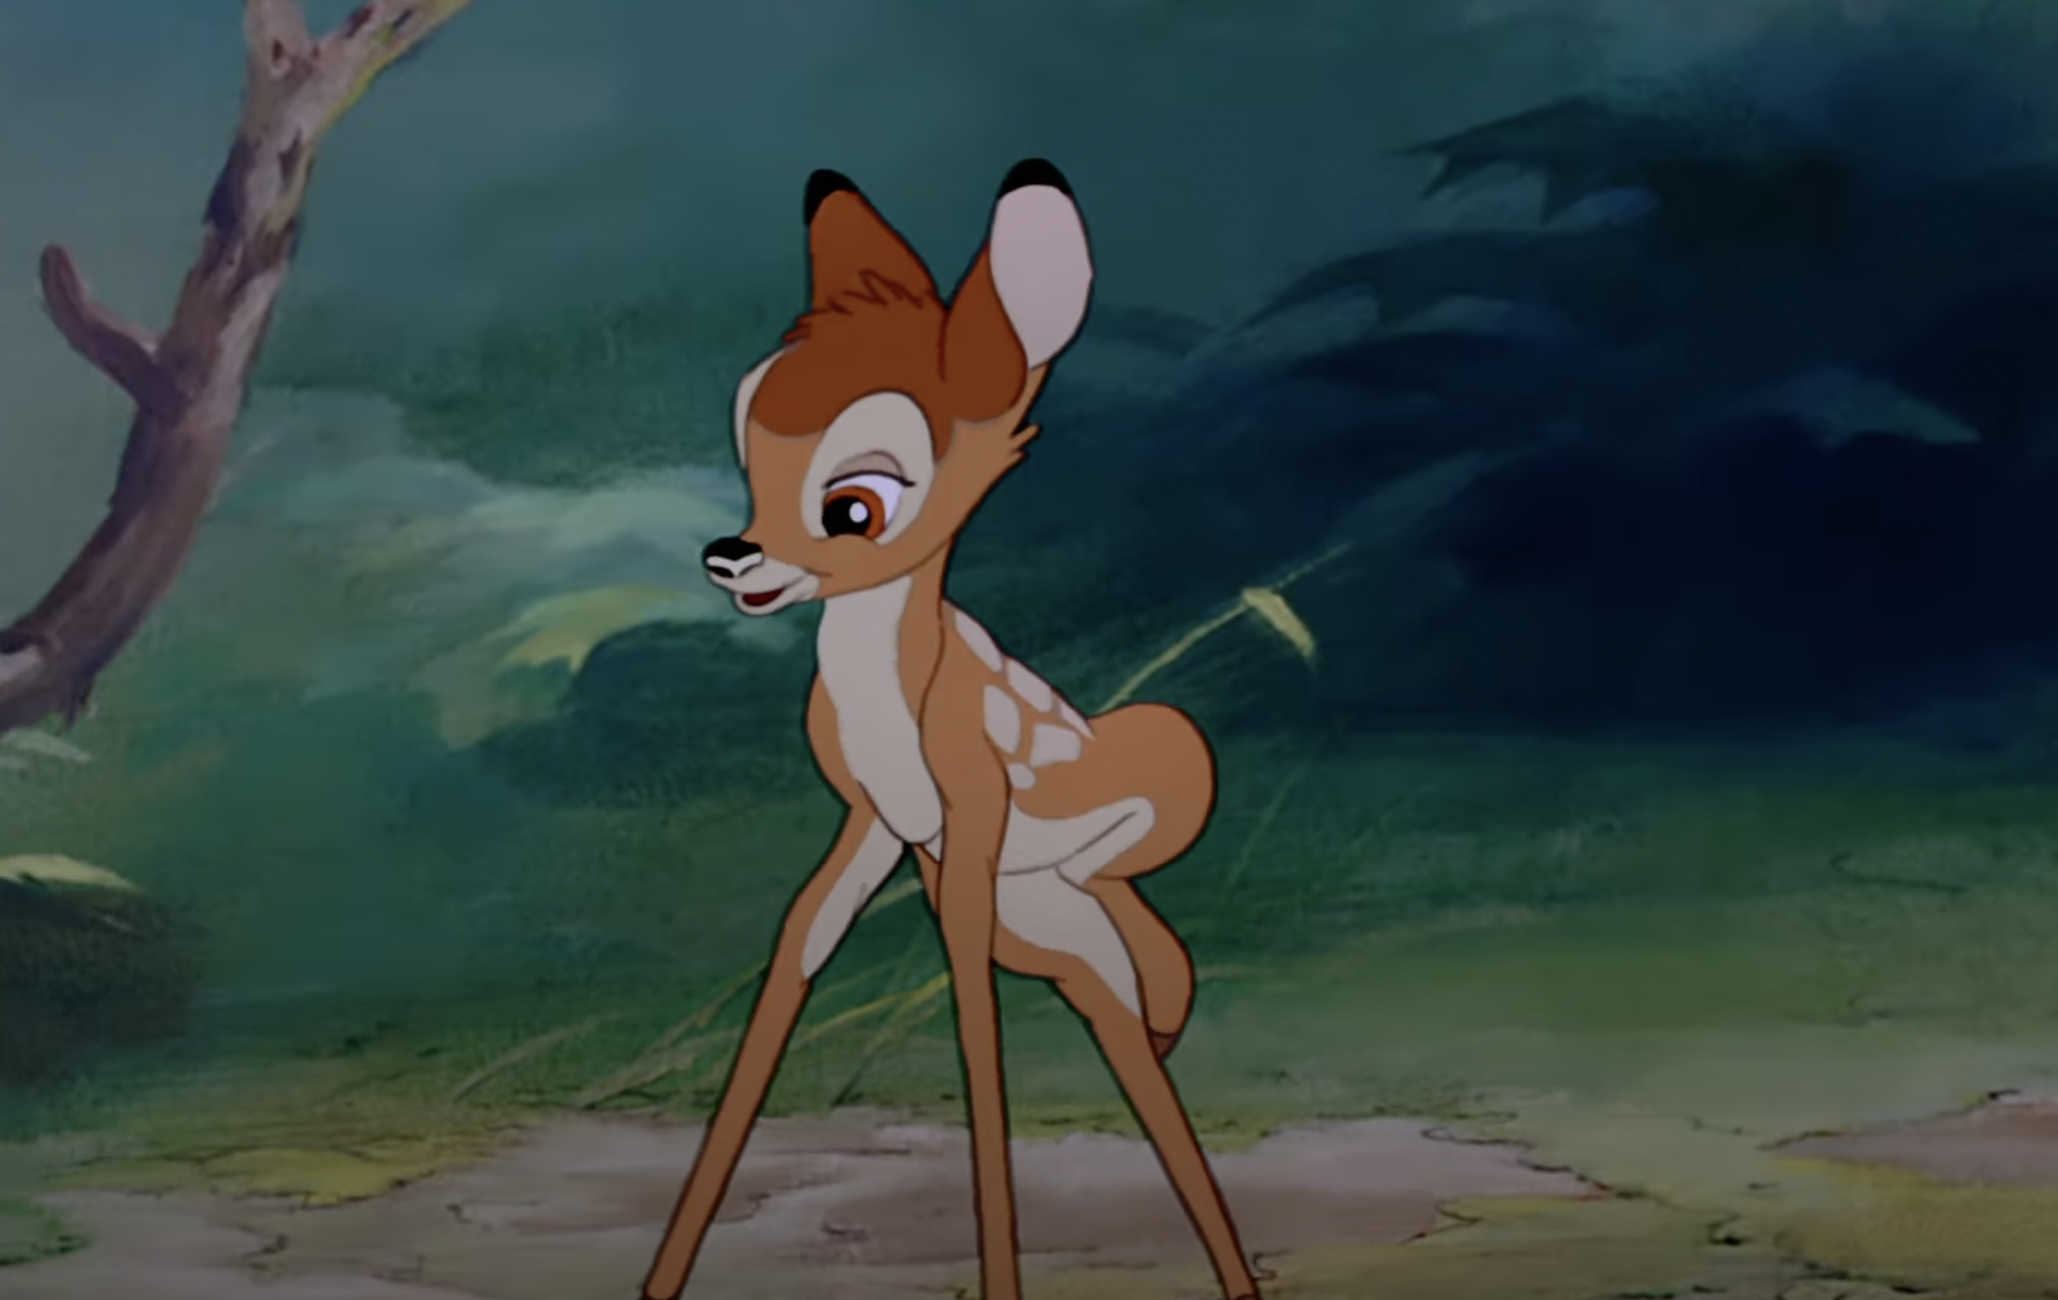 Bambi' remake is in the works, report says - Deseret News